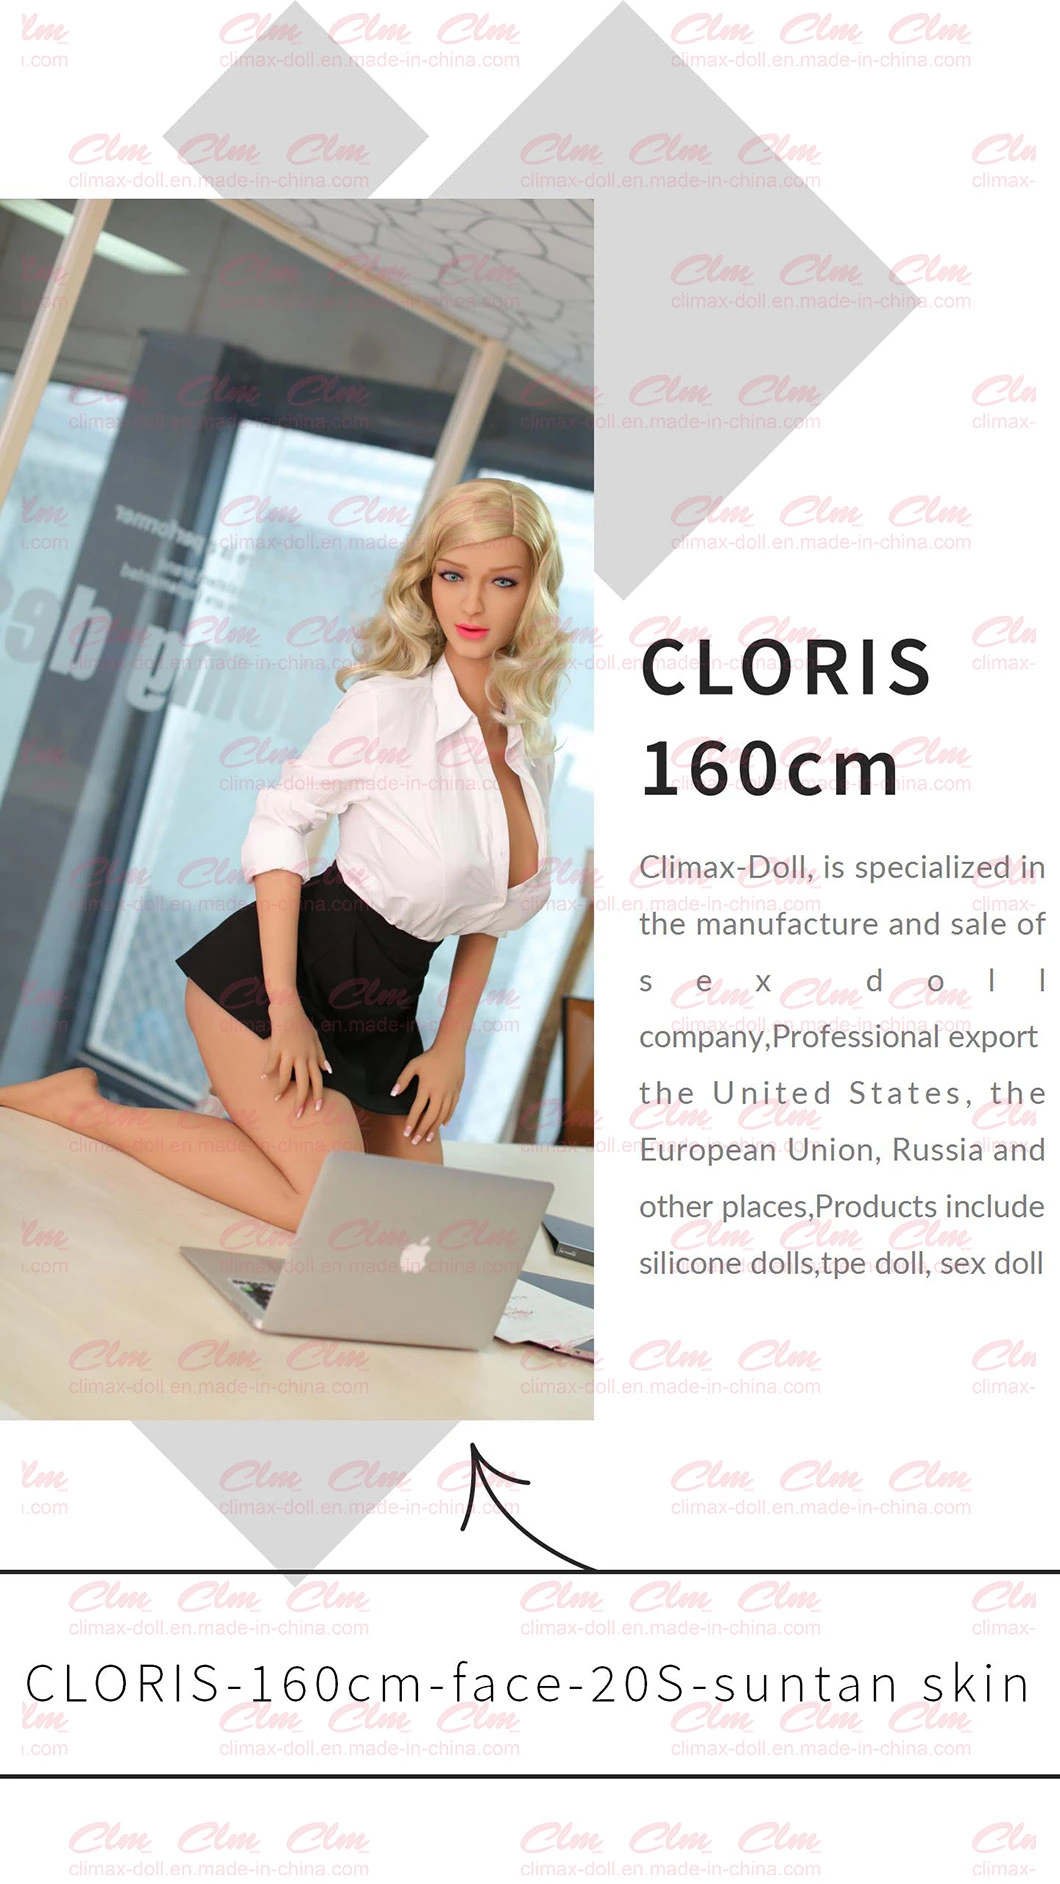 Clm (Climax Doll) 160cm Realistic Male Sex Toys D Cup Sex Doll Sex Toy